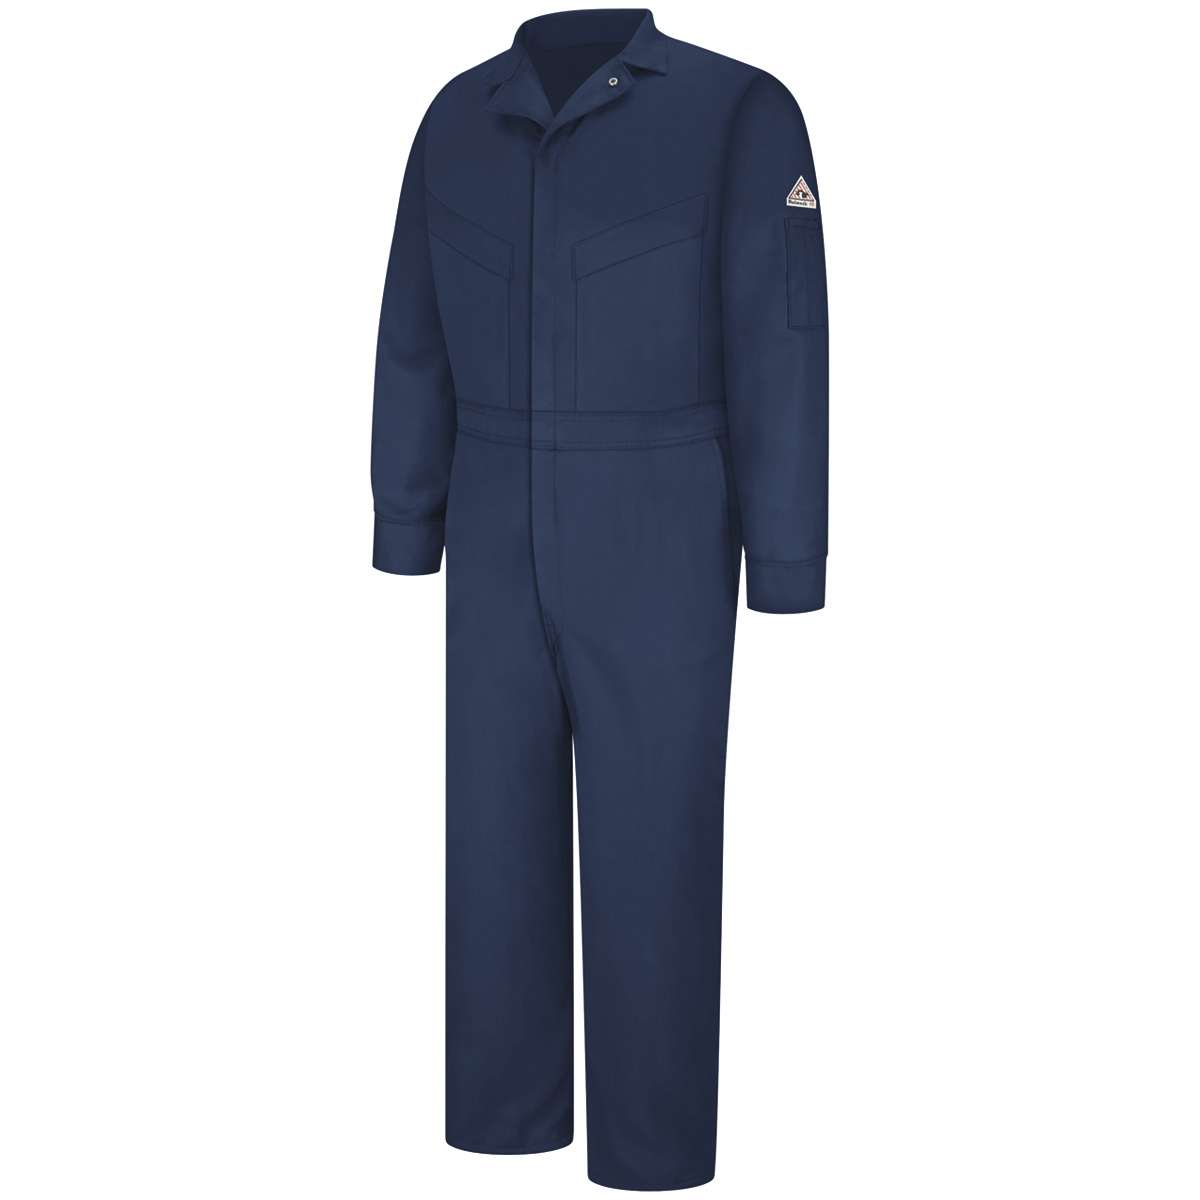 Bulwark® 64 Tall Navy Blue EXCEL FR® ComforTouch® Sateen/Cotton/Nylon Water Repellent Flame Resistant Coveralls With Zipper Fron